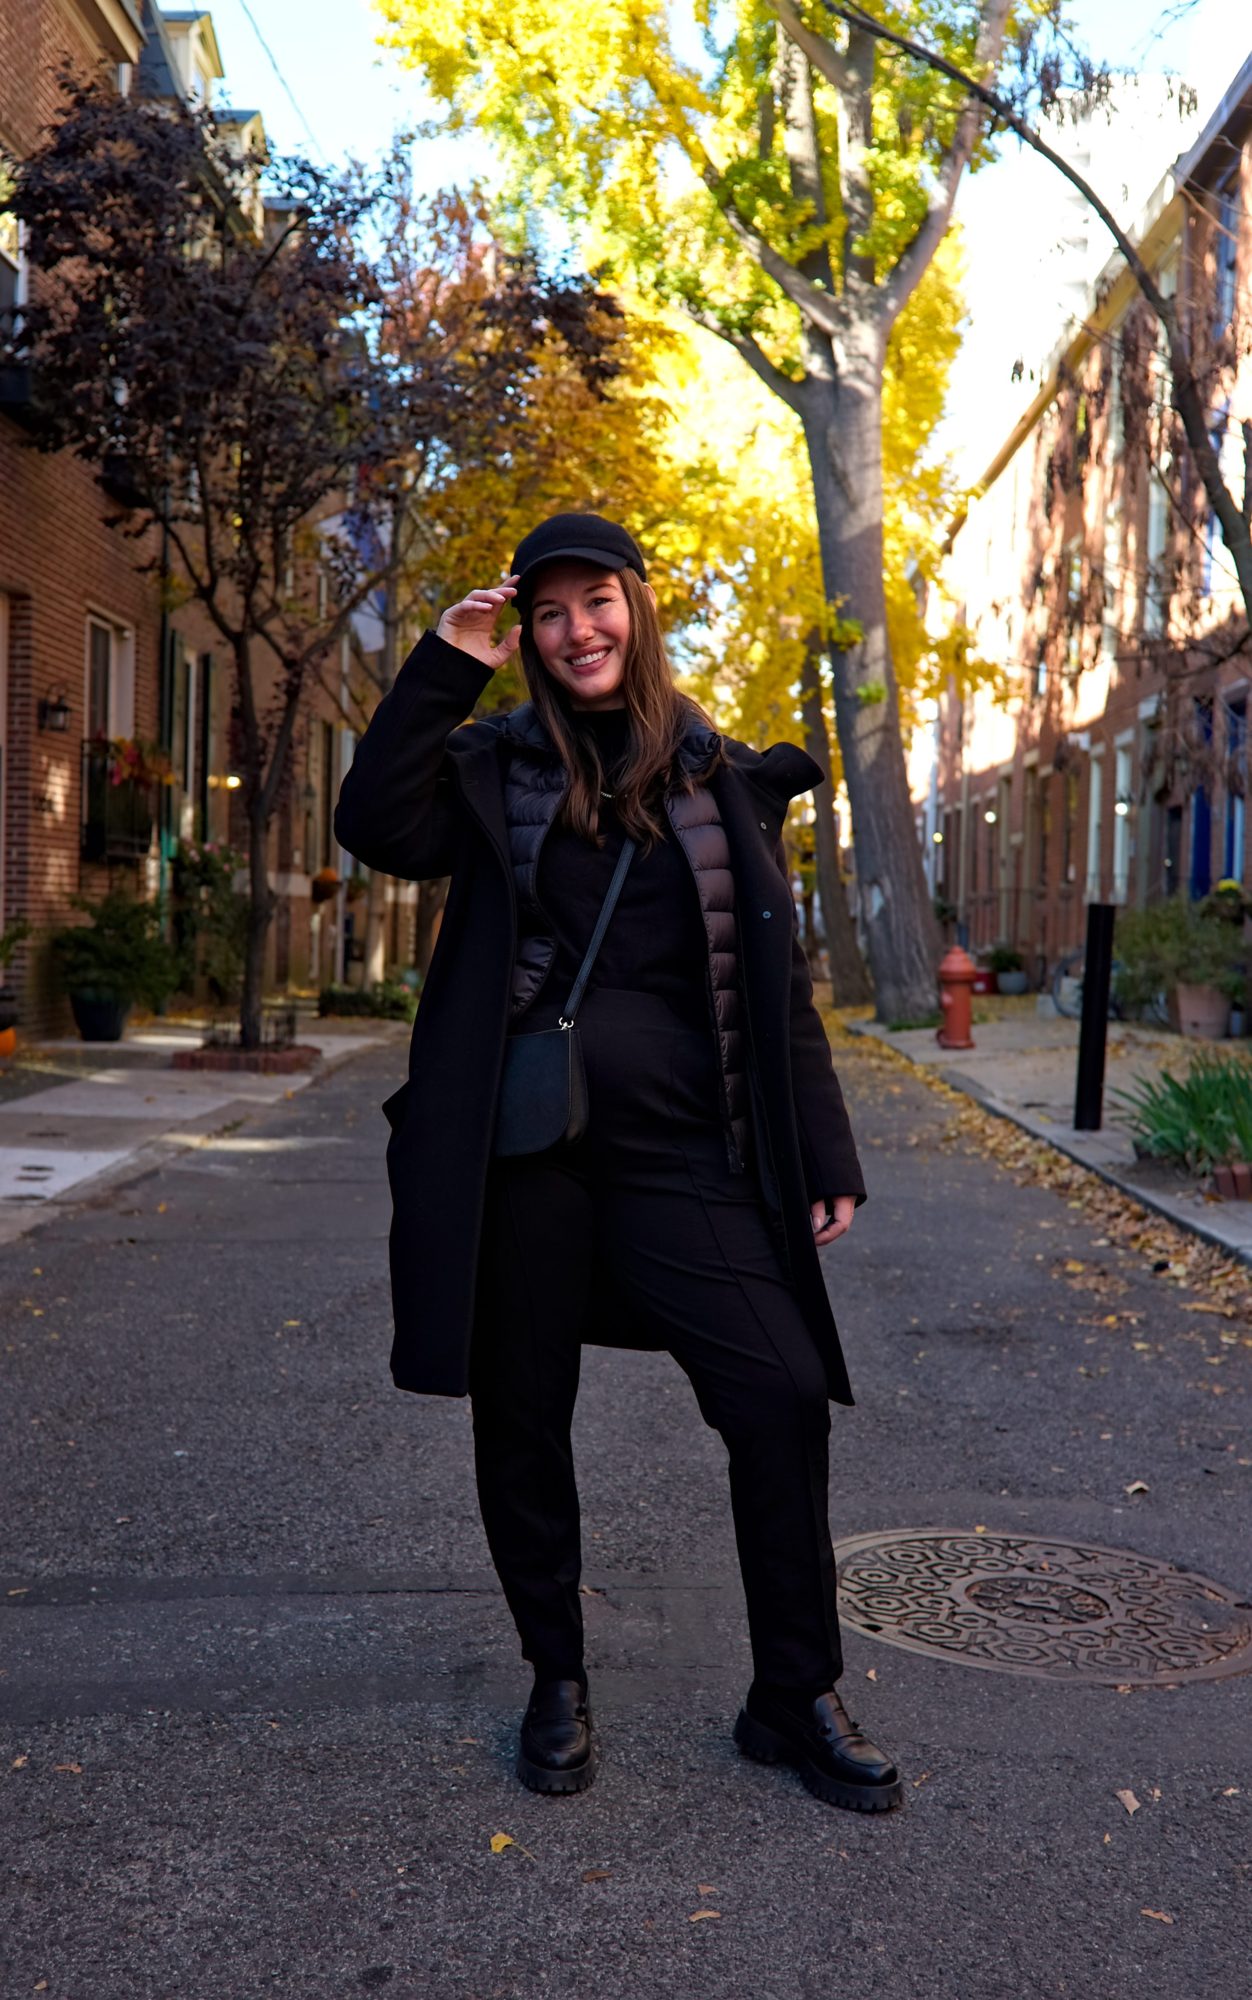 Alyssa wears an all black outfit with wool pants, a cashmere sweater, wool coat, and cashmere cap